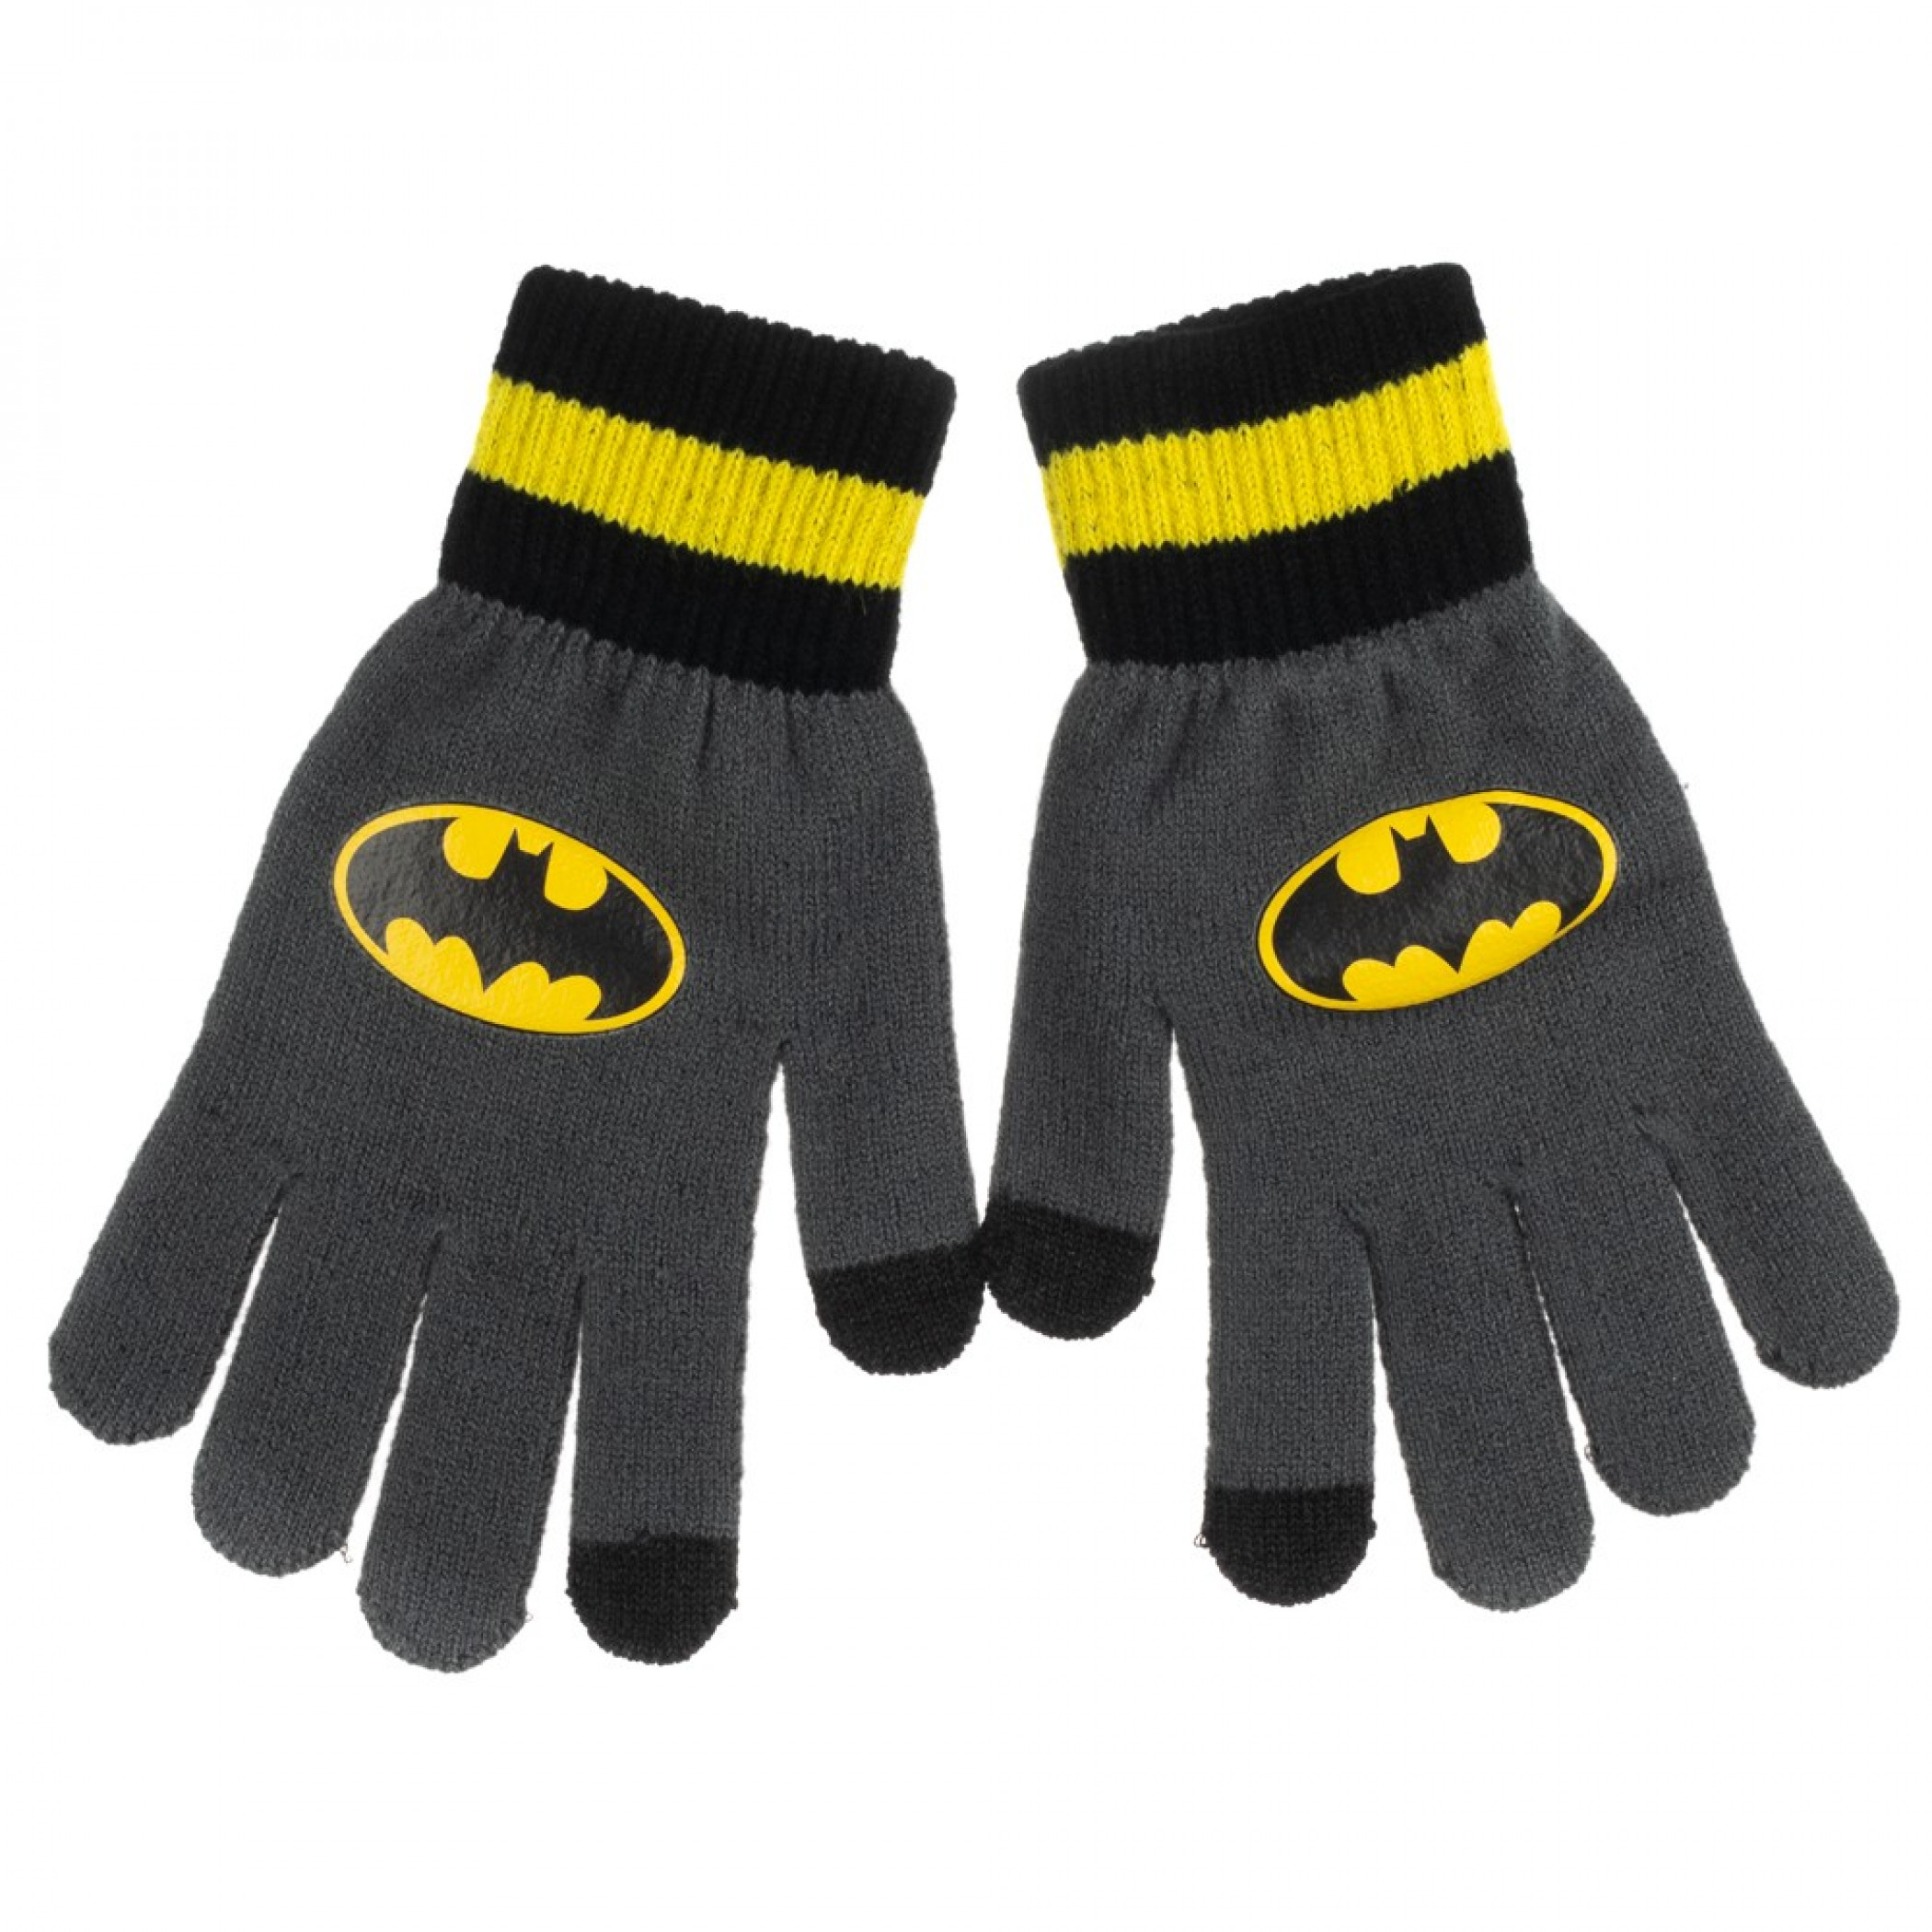 Batman Symbol Gloves with Texting Ability